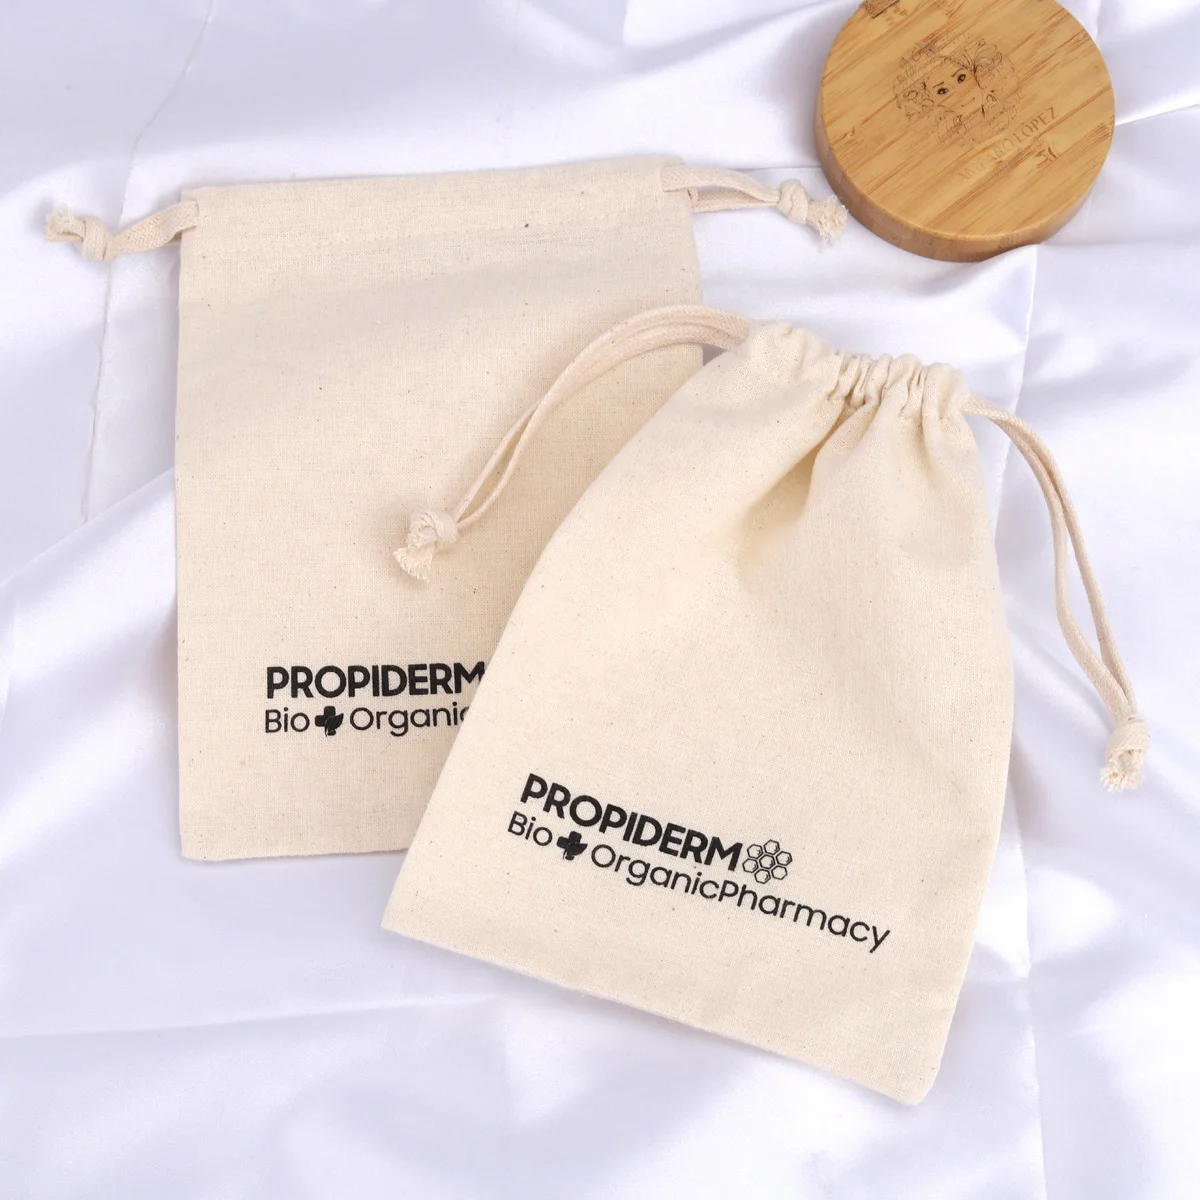 High Quality Natural Cotton Muslin Bag Customized Small Drawstring Cotton Dust Pouch For Soap Cosmetic Packaging